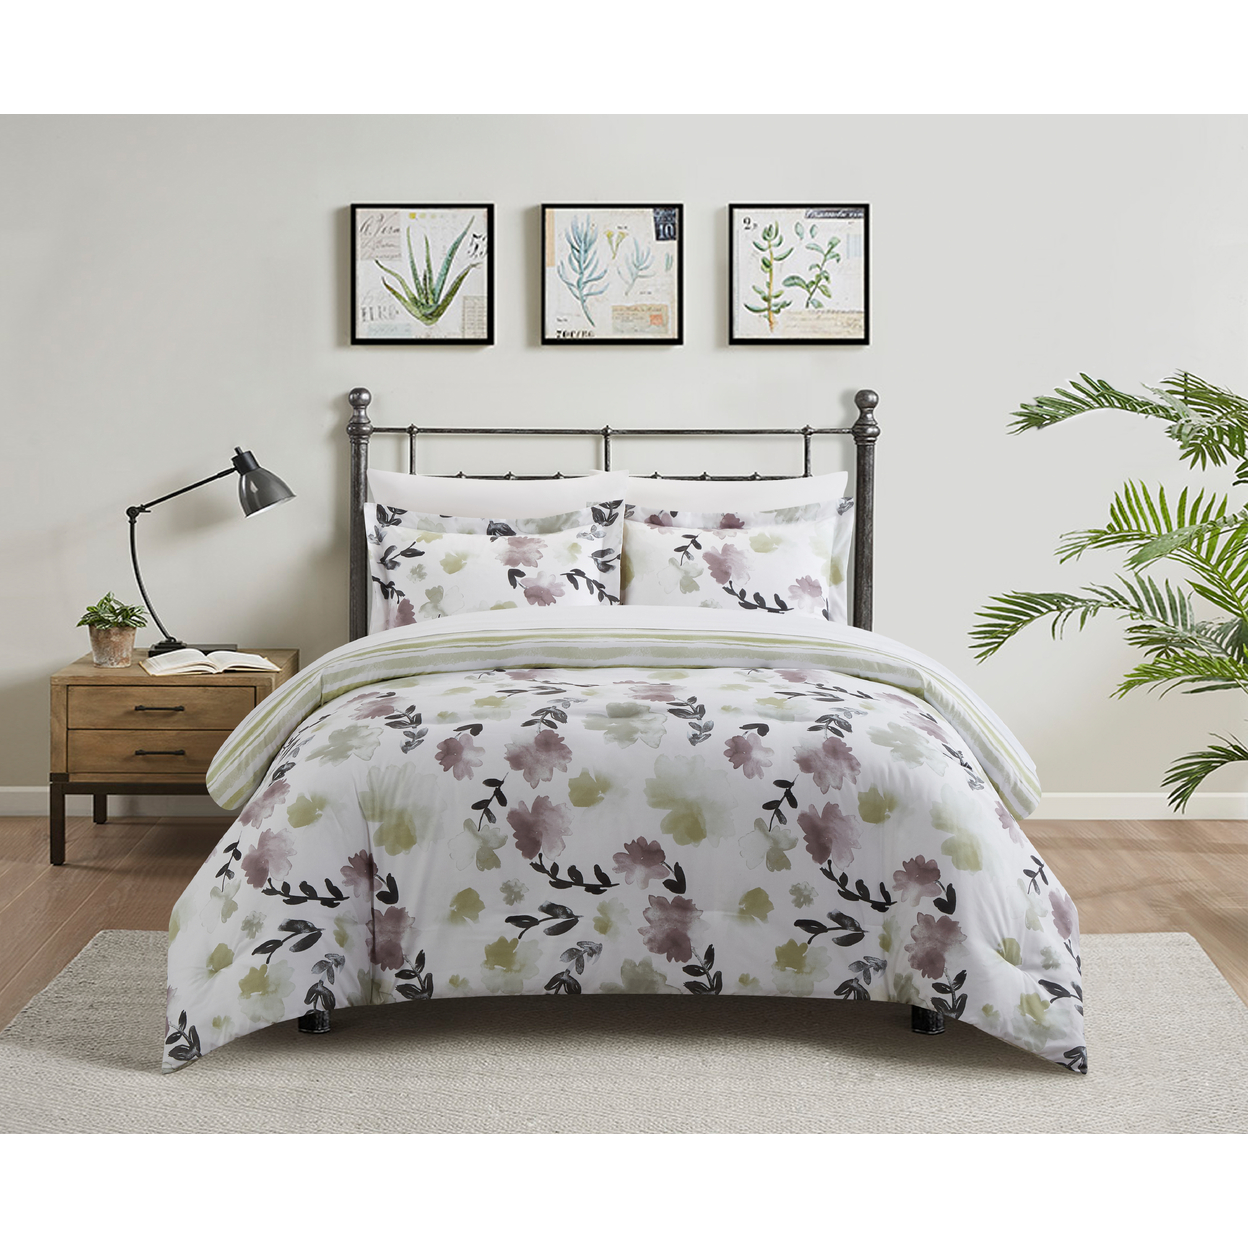 3 Or 2 Piece Duvet Cover Set Print Design With Zipper Closure - Everly Green, Queen